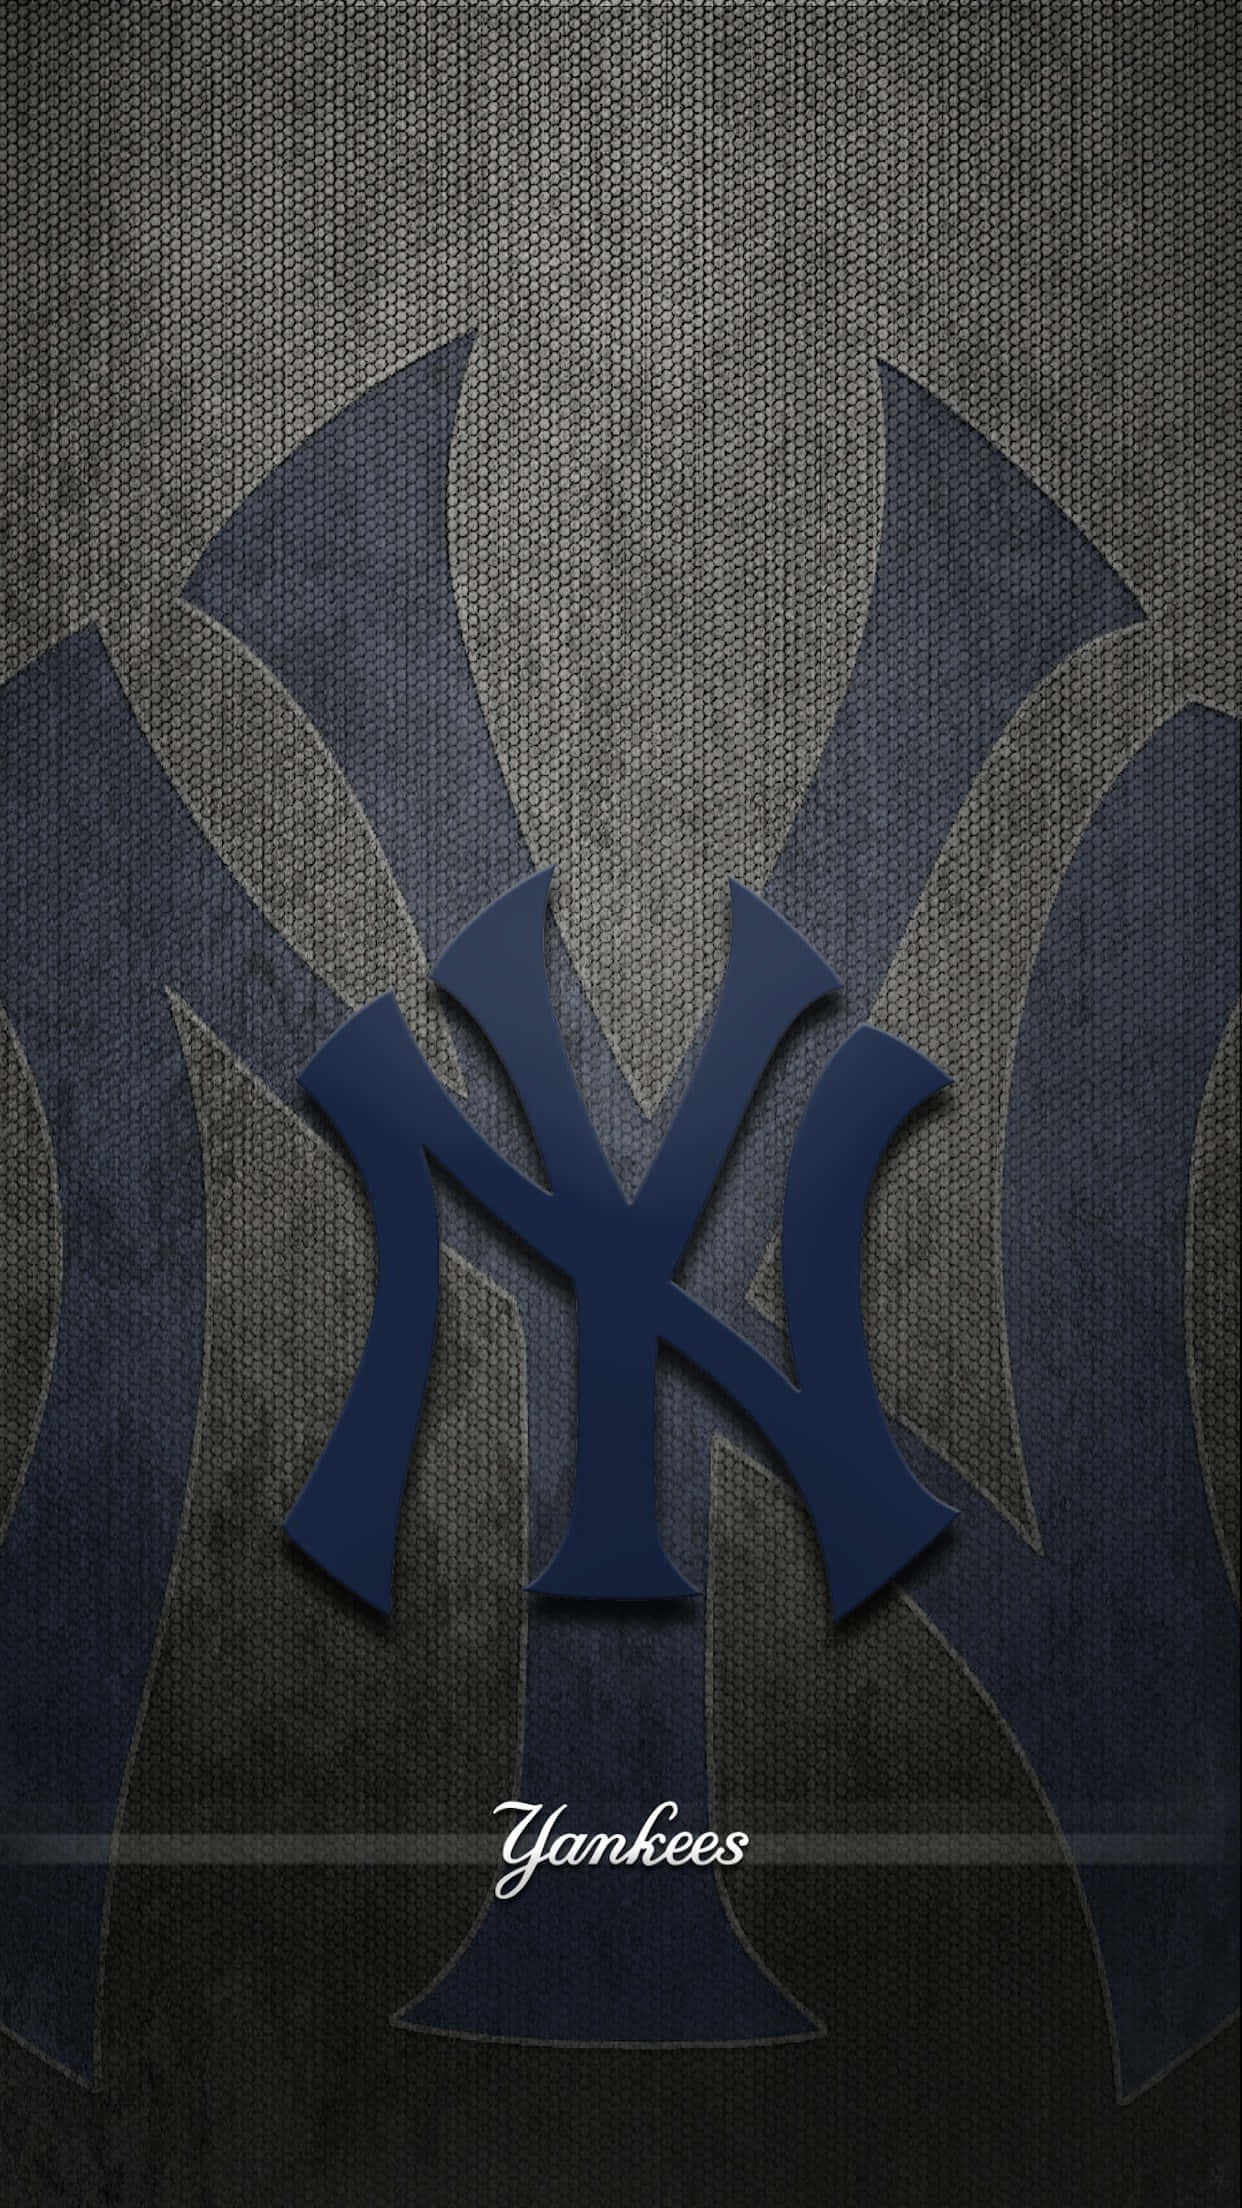 Gray And Blue New York Yankees Iphone Wallpaper